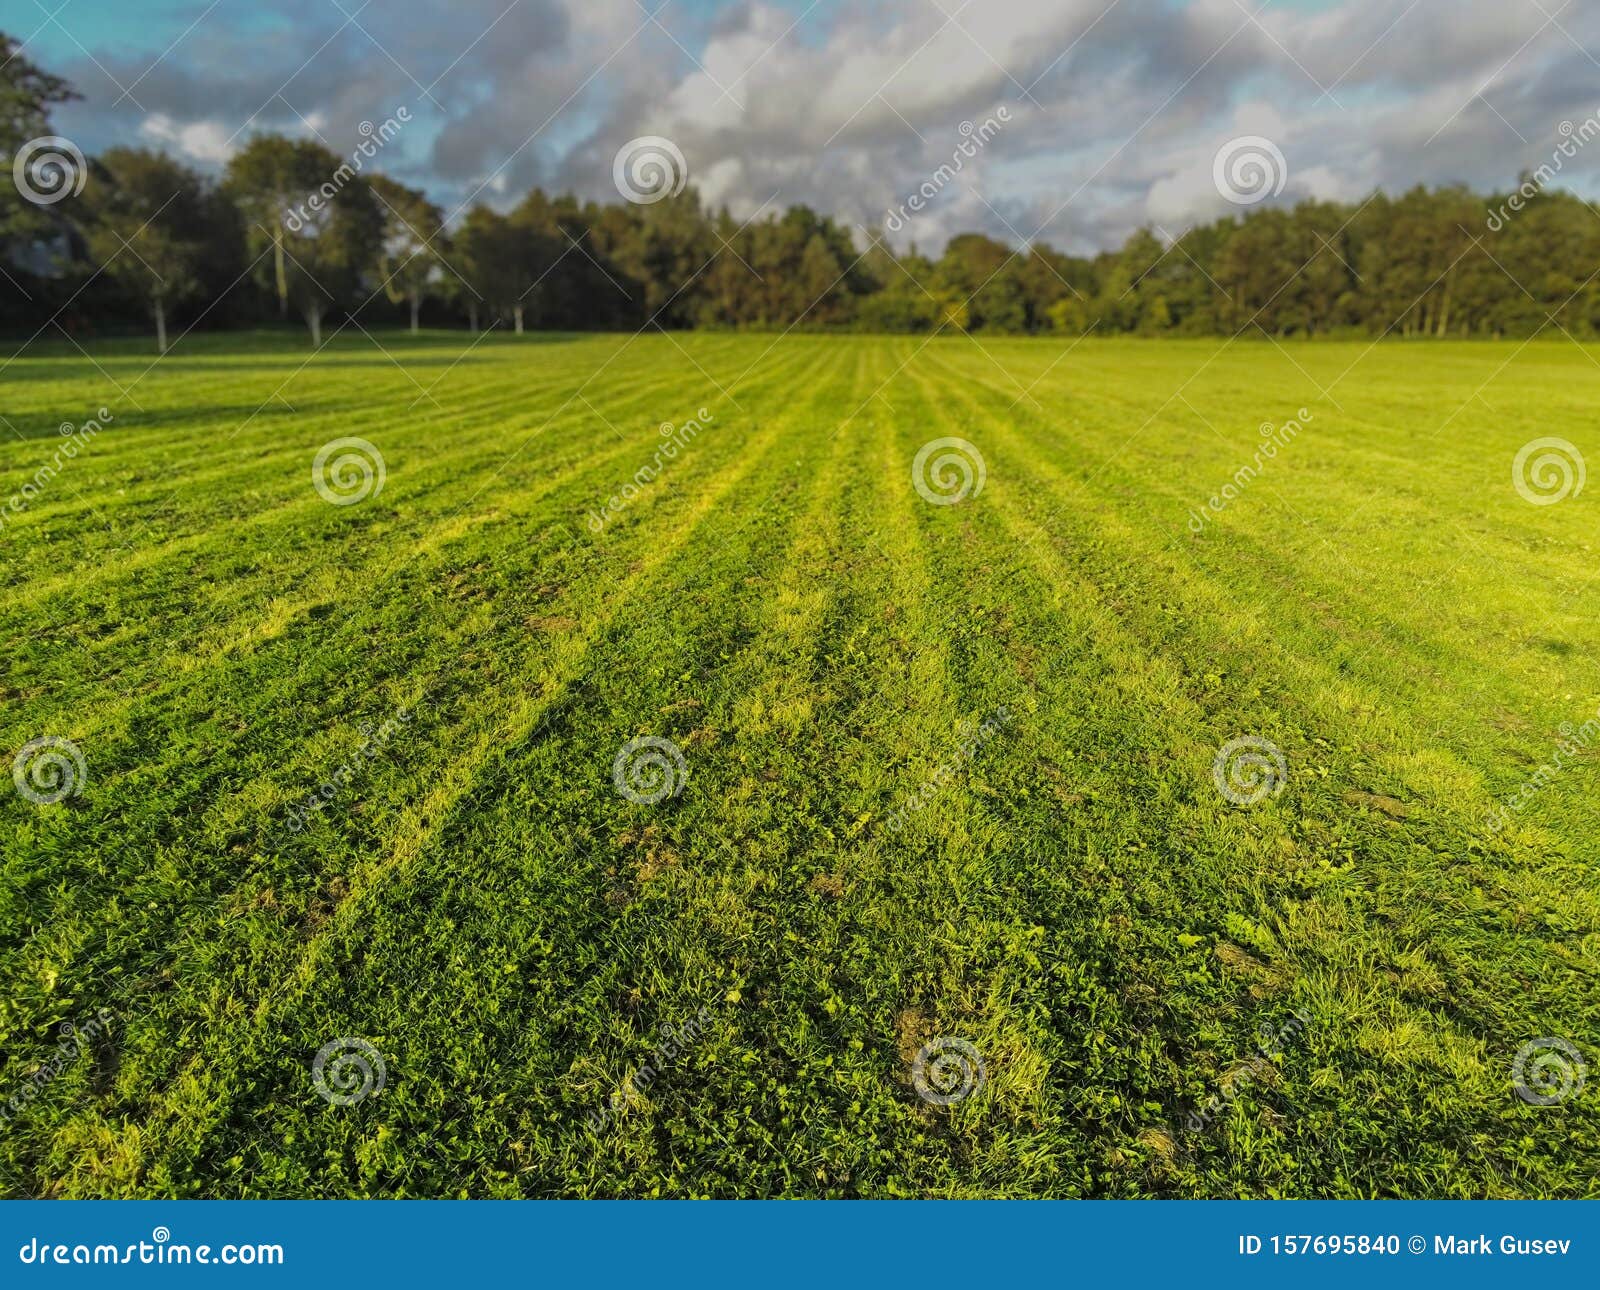 Simple Landscape Background, Freshly Cut Grass in a Park, Selective